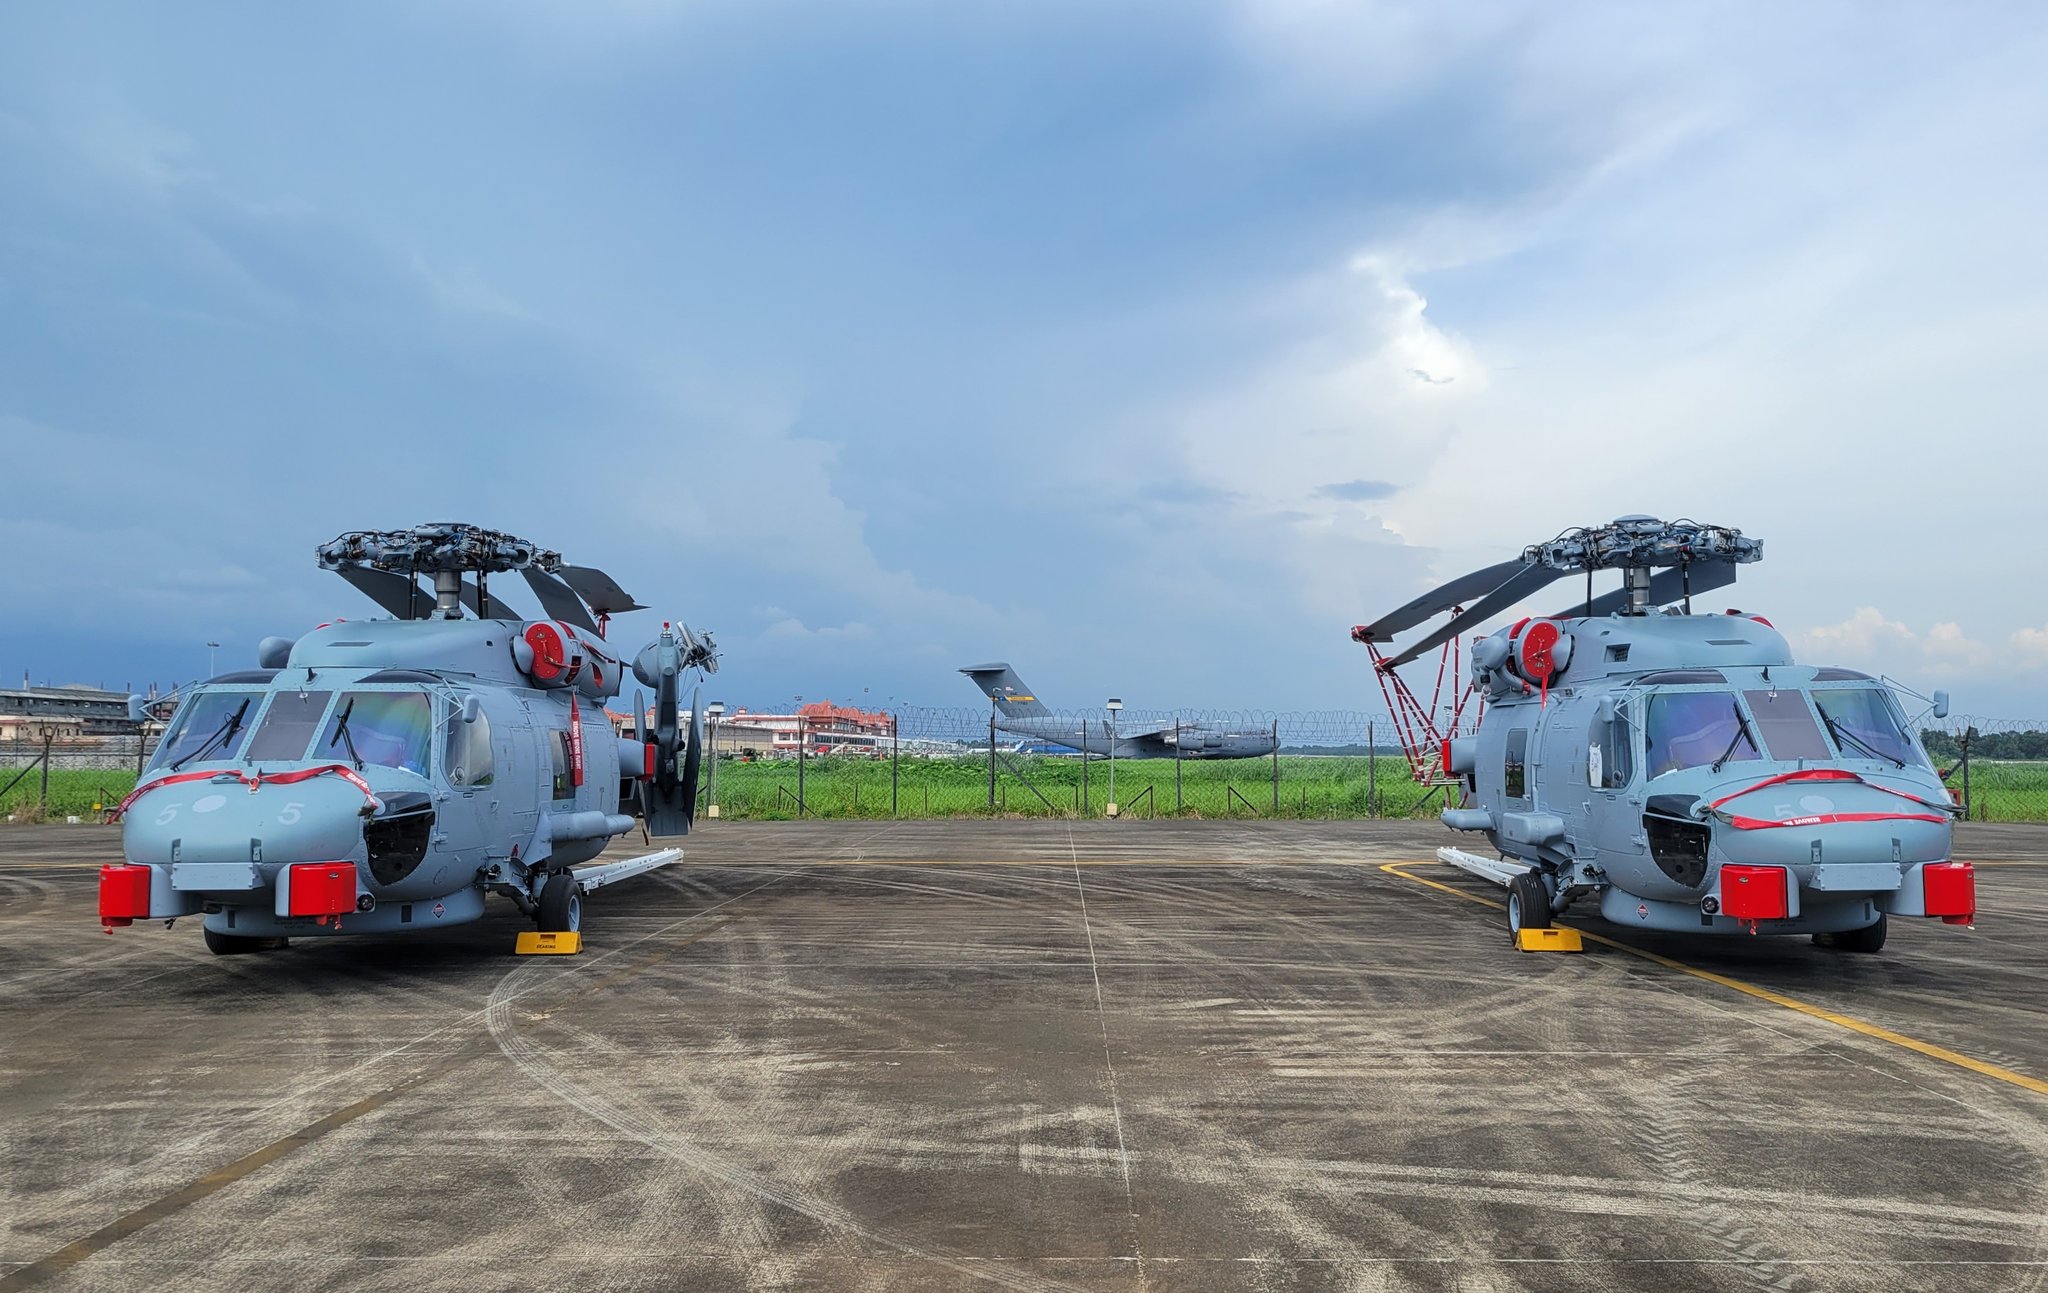 India gets 2 MH 60R helicopters from United States